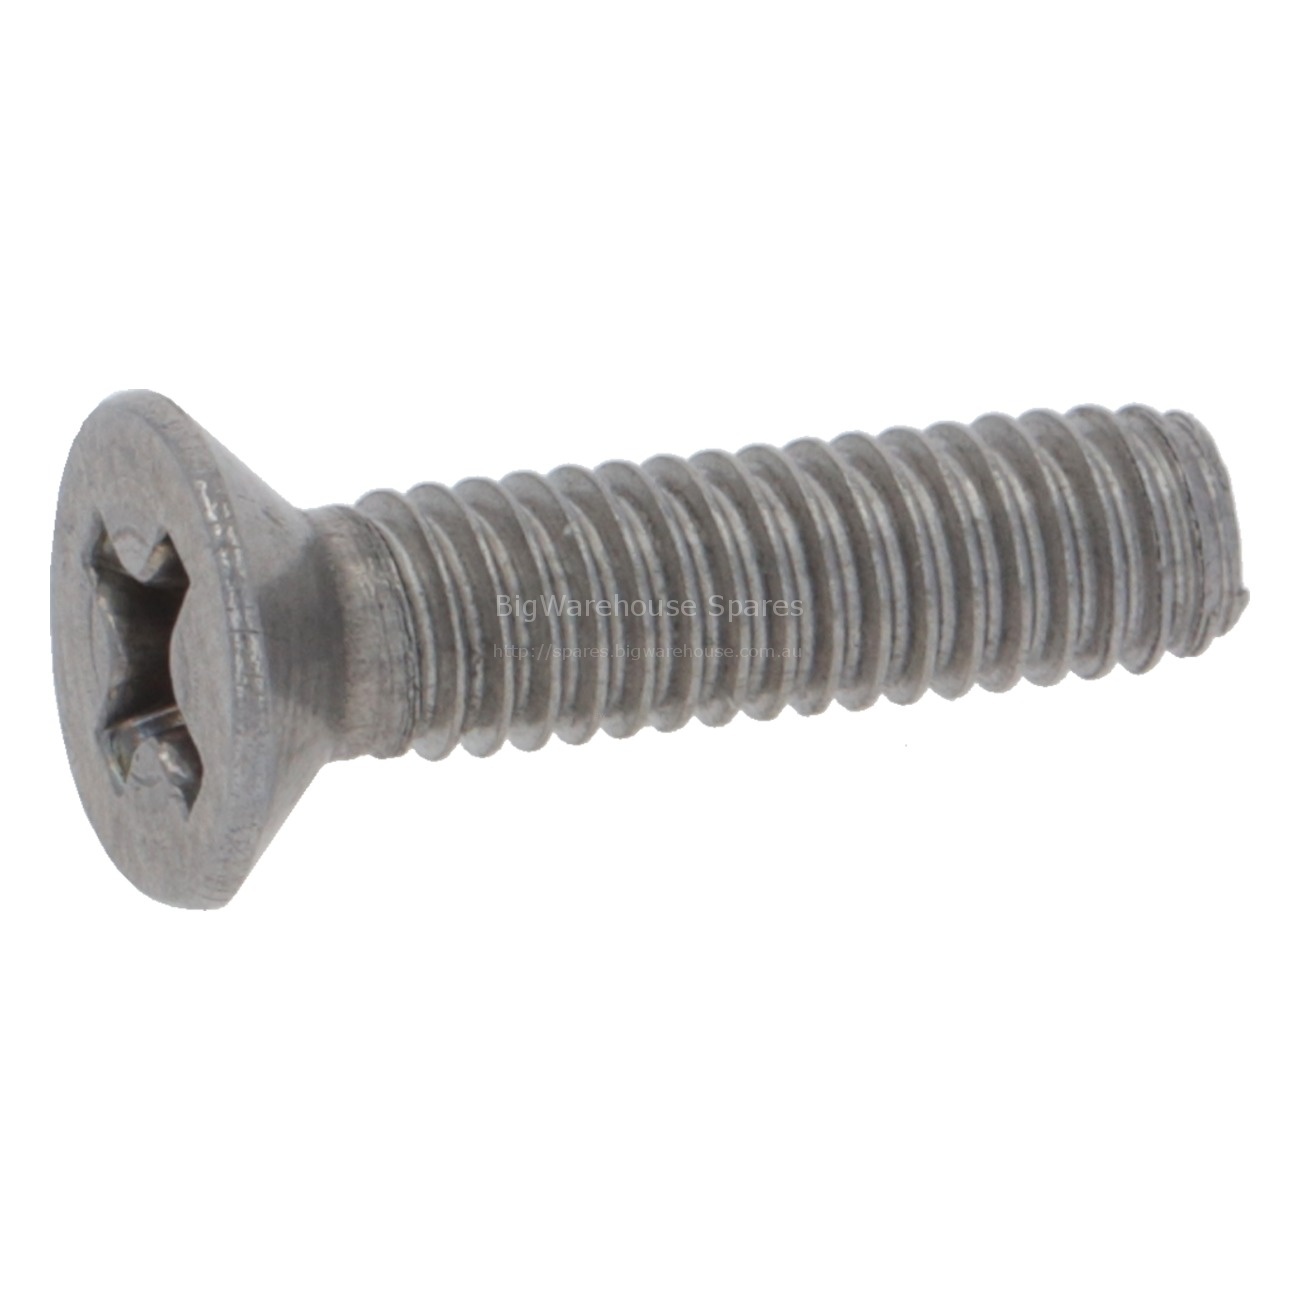 STAINLESS STEEL SCREW M4x16 TSP TCR